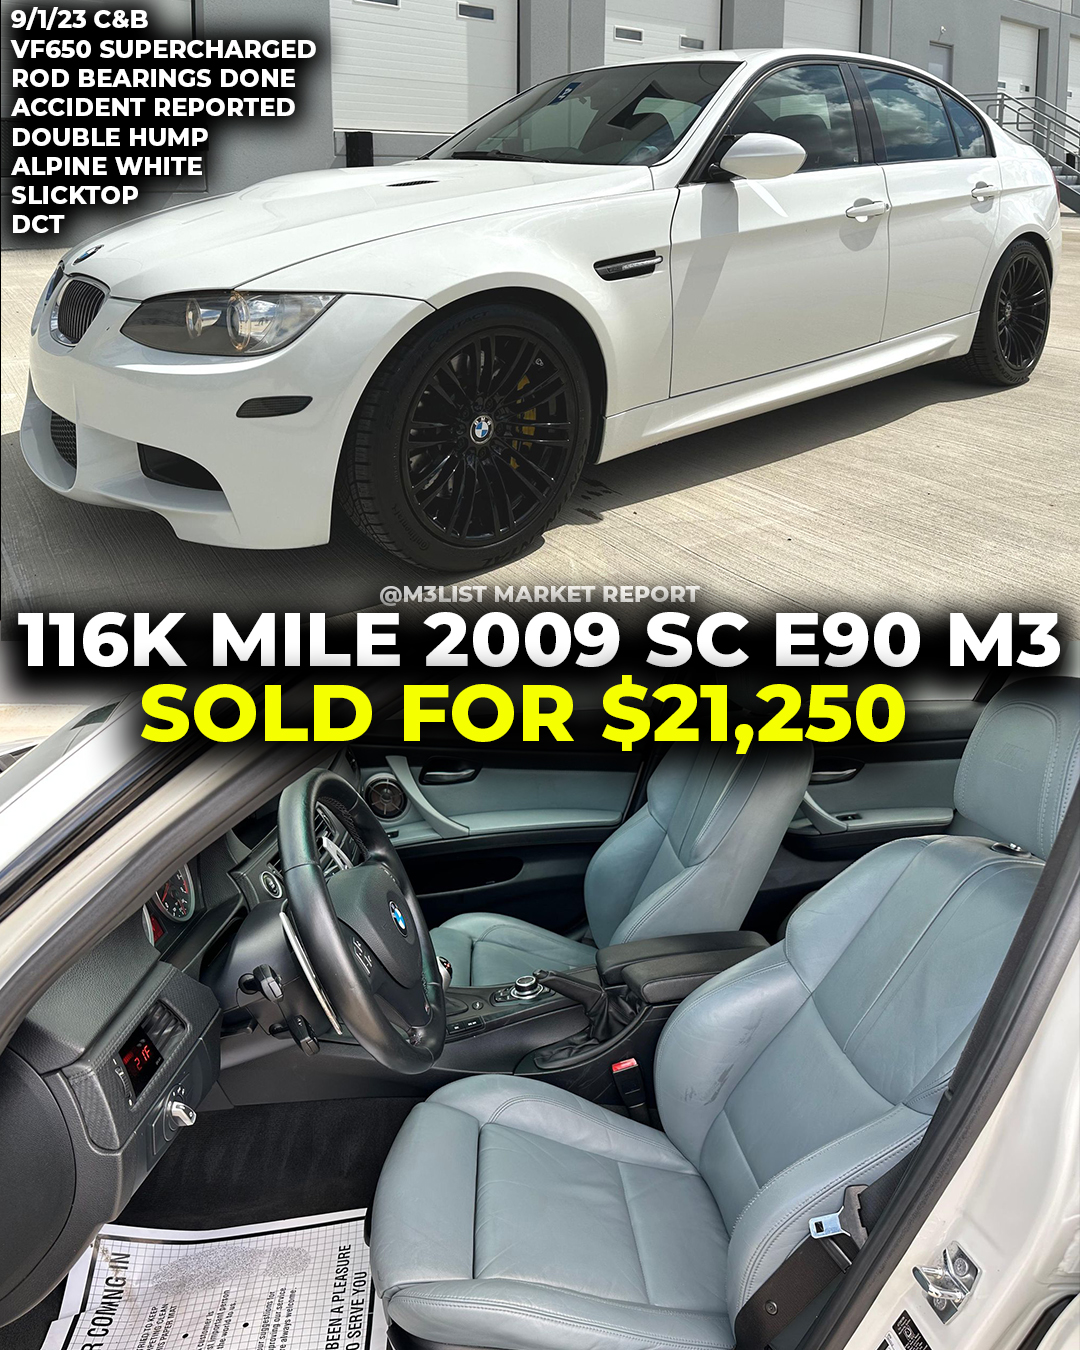 Supercharged BMW E90 M3 with 116k miles sells for $21k on Cars & Bids. Slicktop DCT!